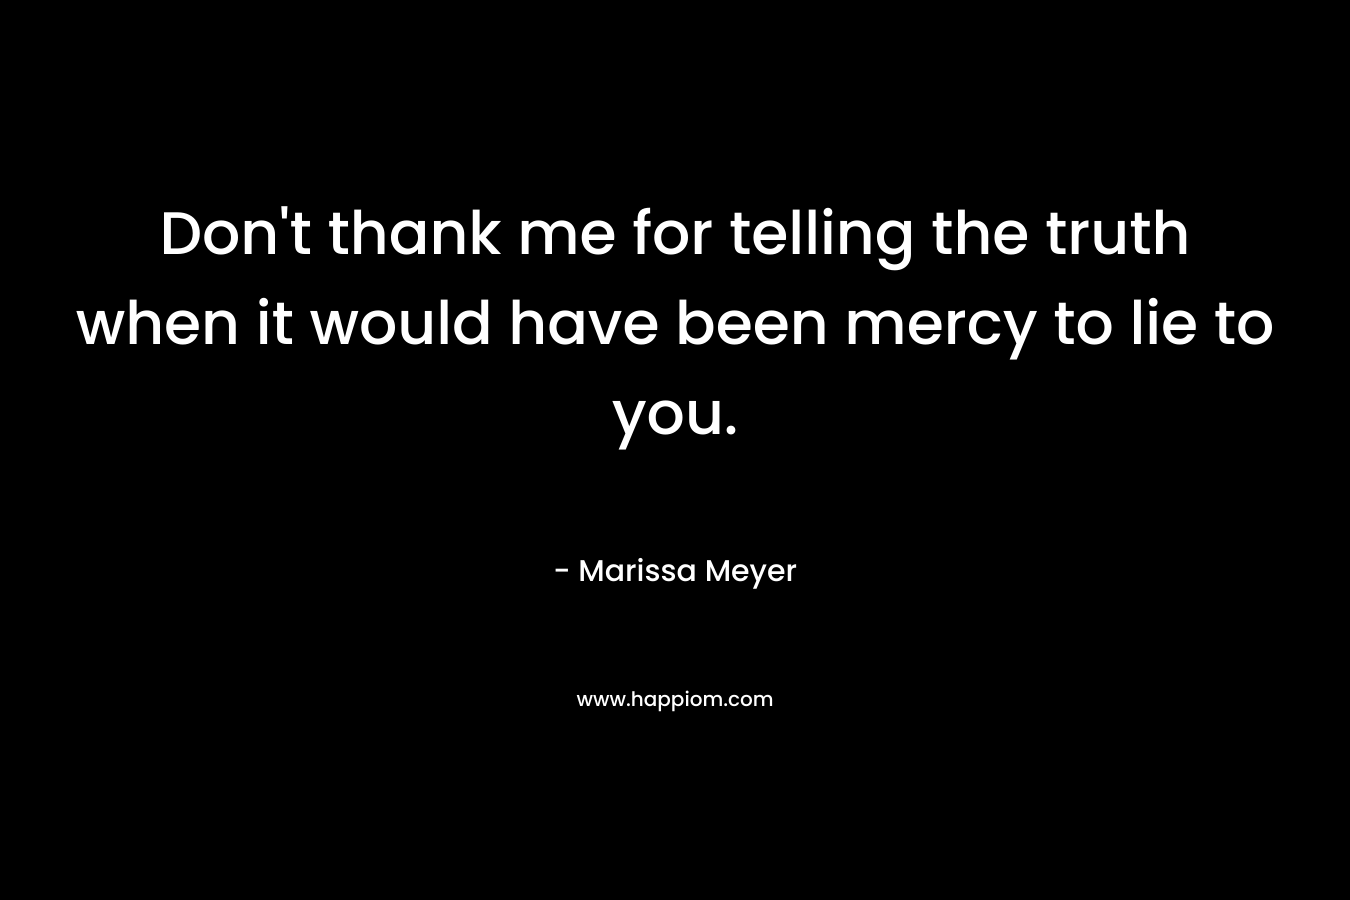 Don’t thank me for telling the truth when it would have been mercy to lie to you. – Marissa Meyer